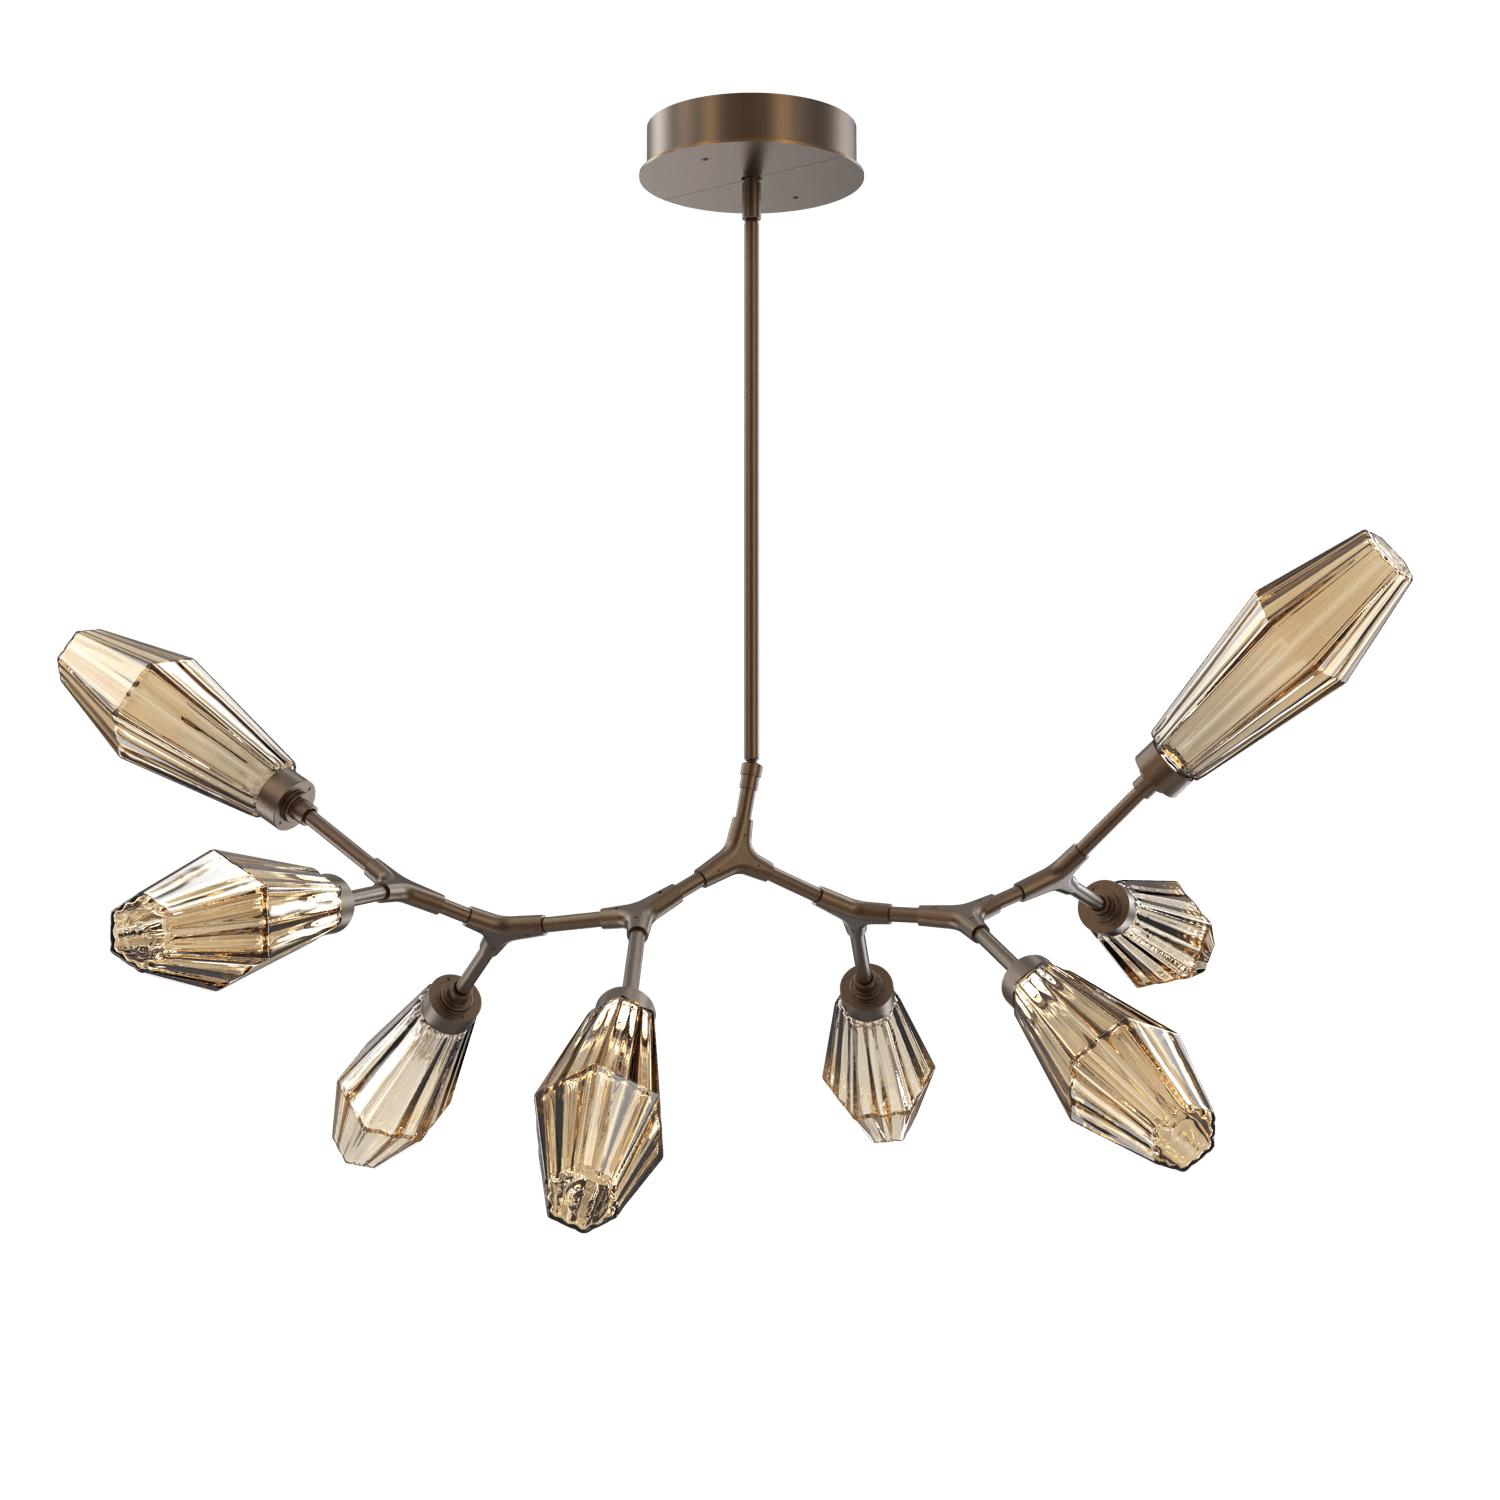 PLB0049-BB-FB-RB-Hammerton-Studio-Aalto-8-light-modern-branch-chandelier-with-flat-bronze-finish-and-optic-ribbed-bronze-glass-shades-and-LED-lamping